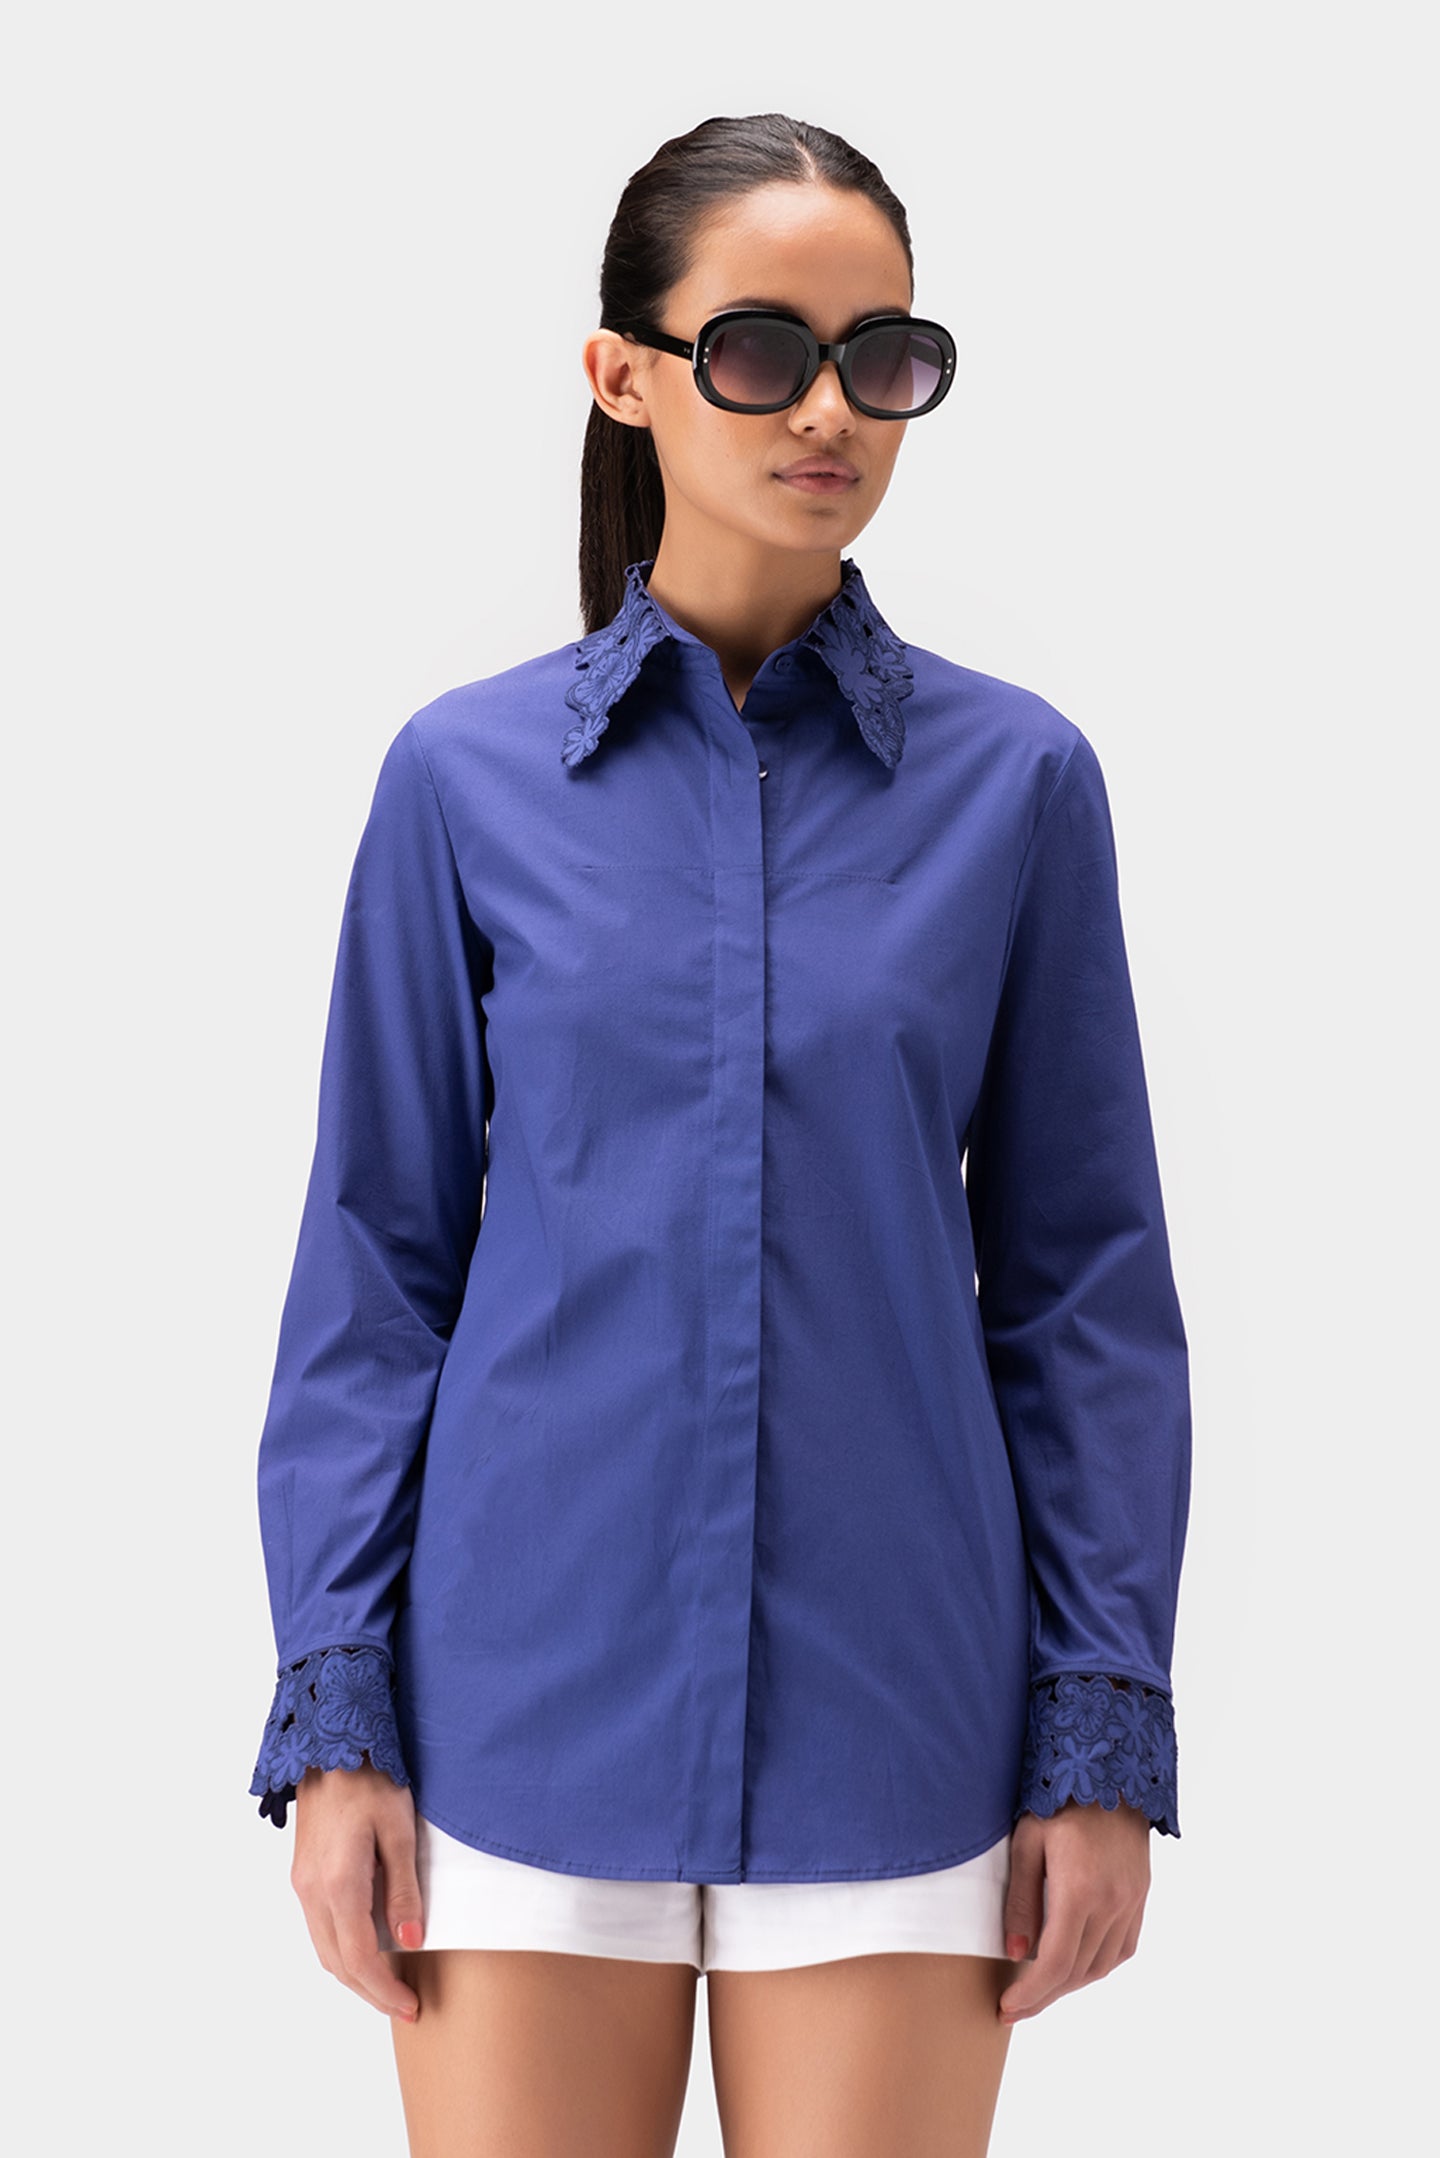 Womens Shirt With Embroidered Collar And Cuffs